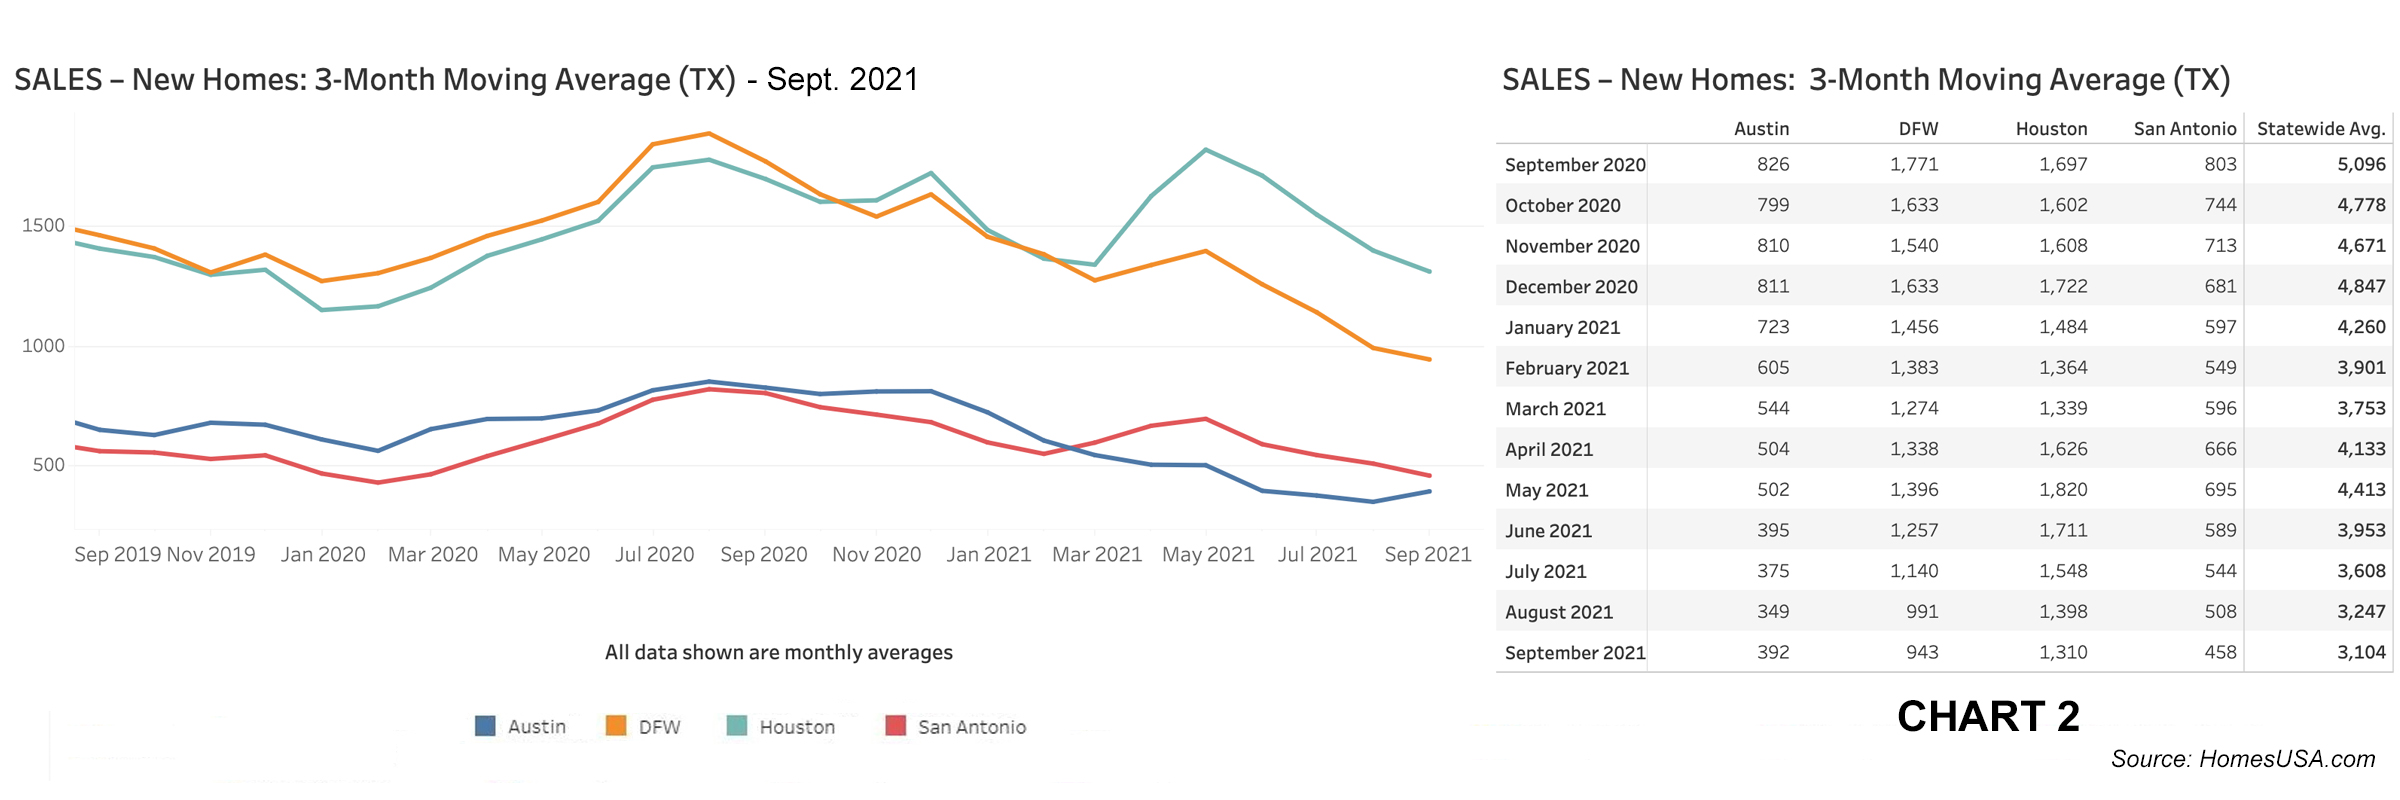 Chart 2: Texas New Home Sales – Sept. 2021